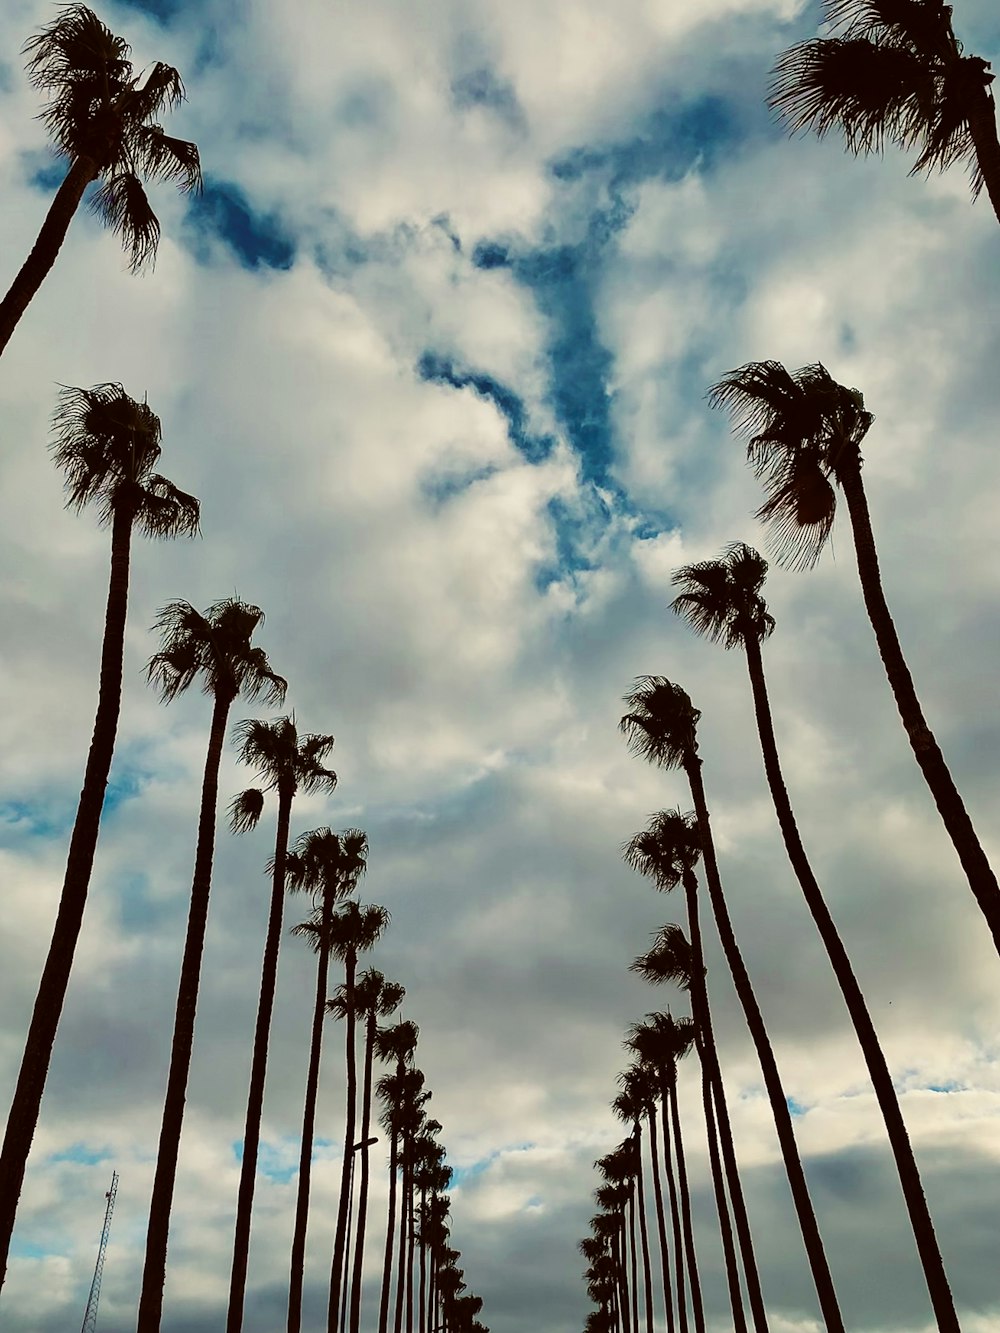 a group of tall palm trees under a cloudy sky